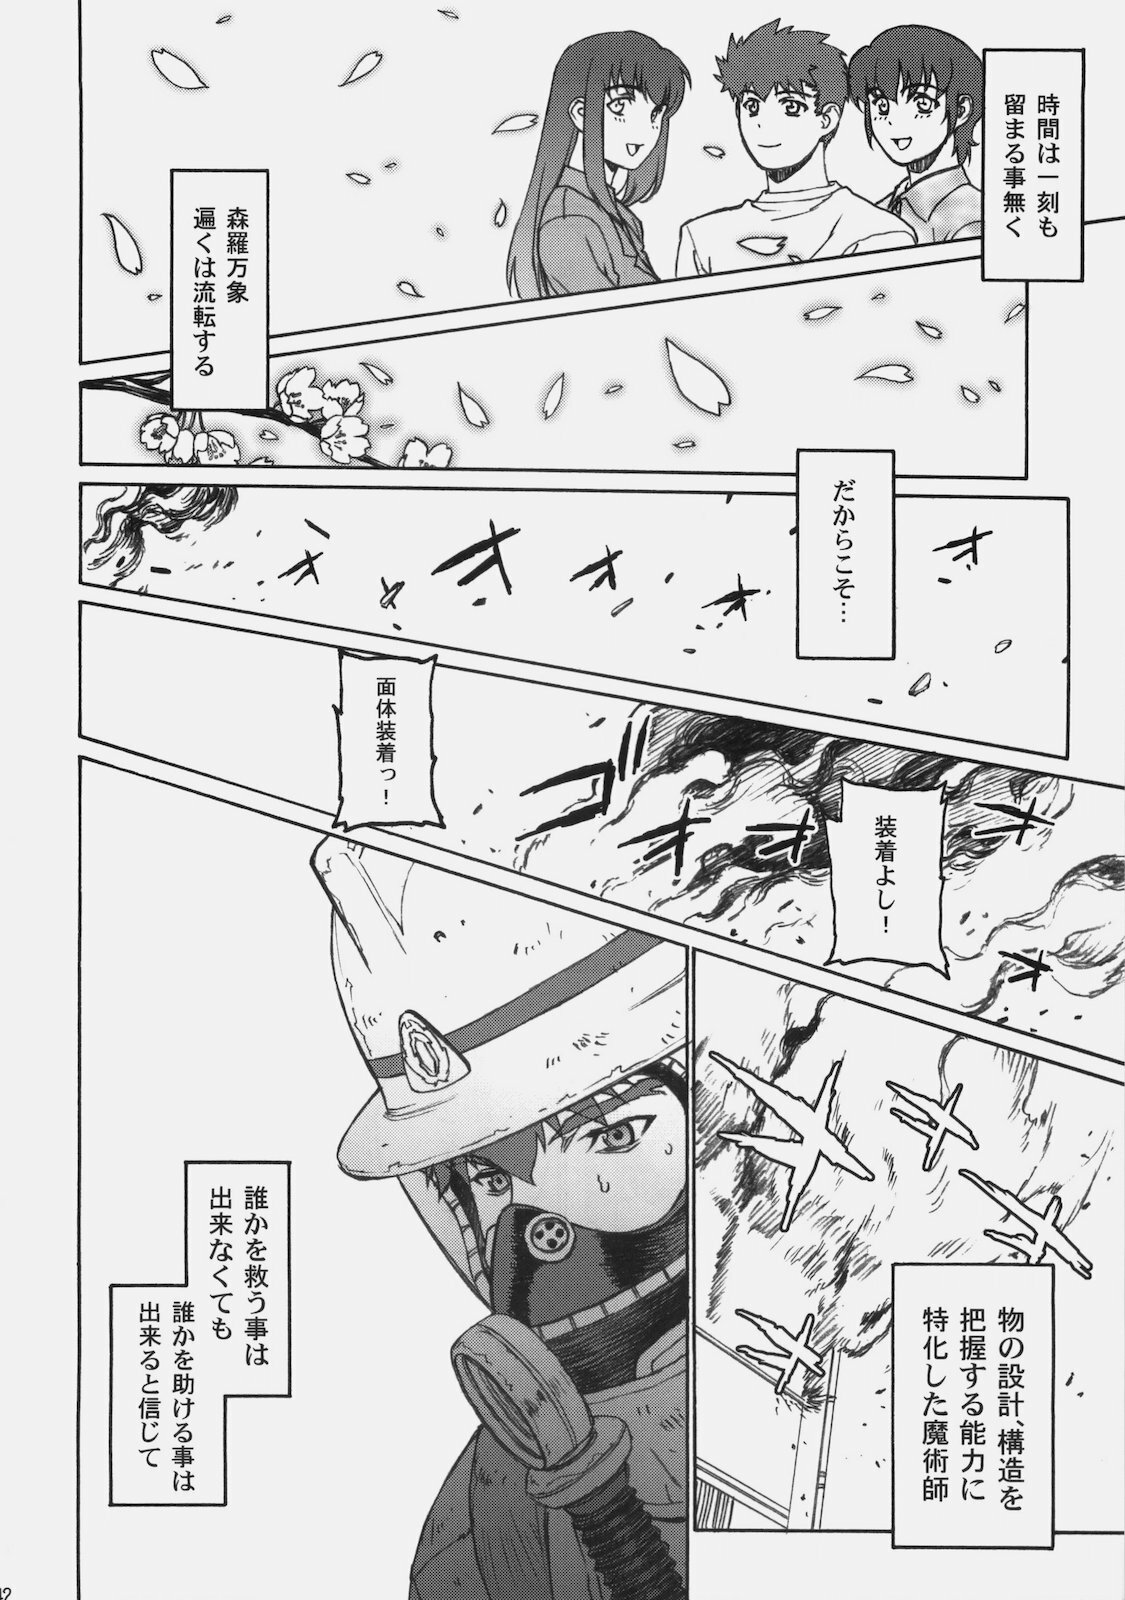 [Motchie Kingdom (Motchie)] Theater of Fate (Fate/stay night) page 39 full